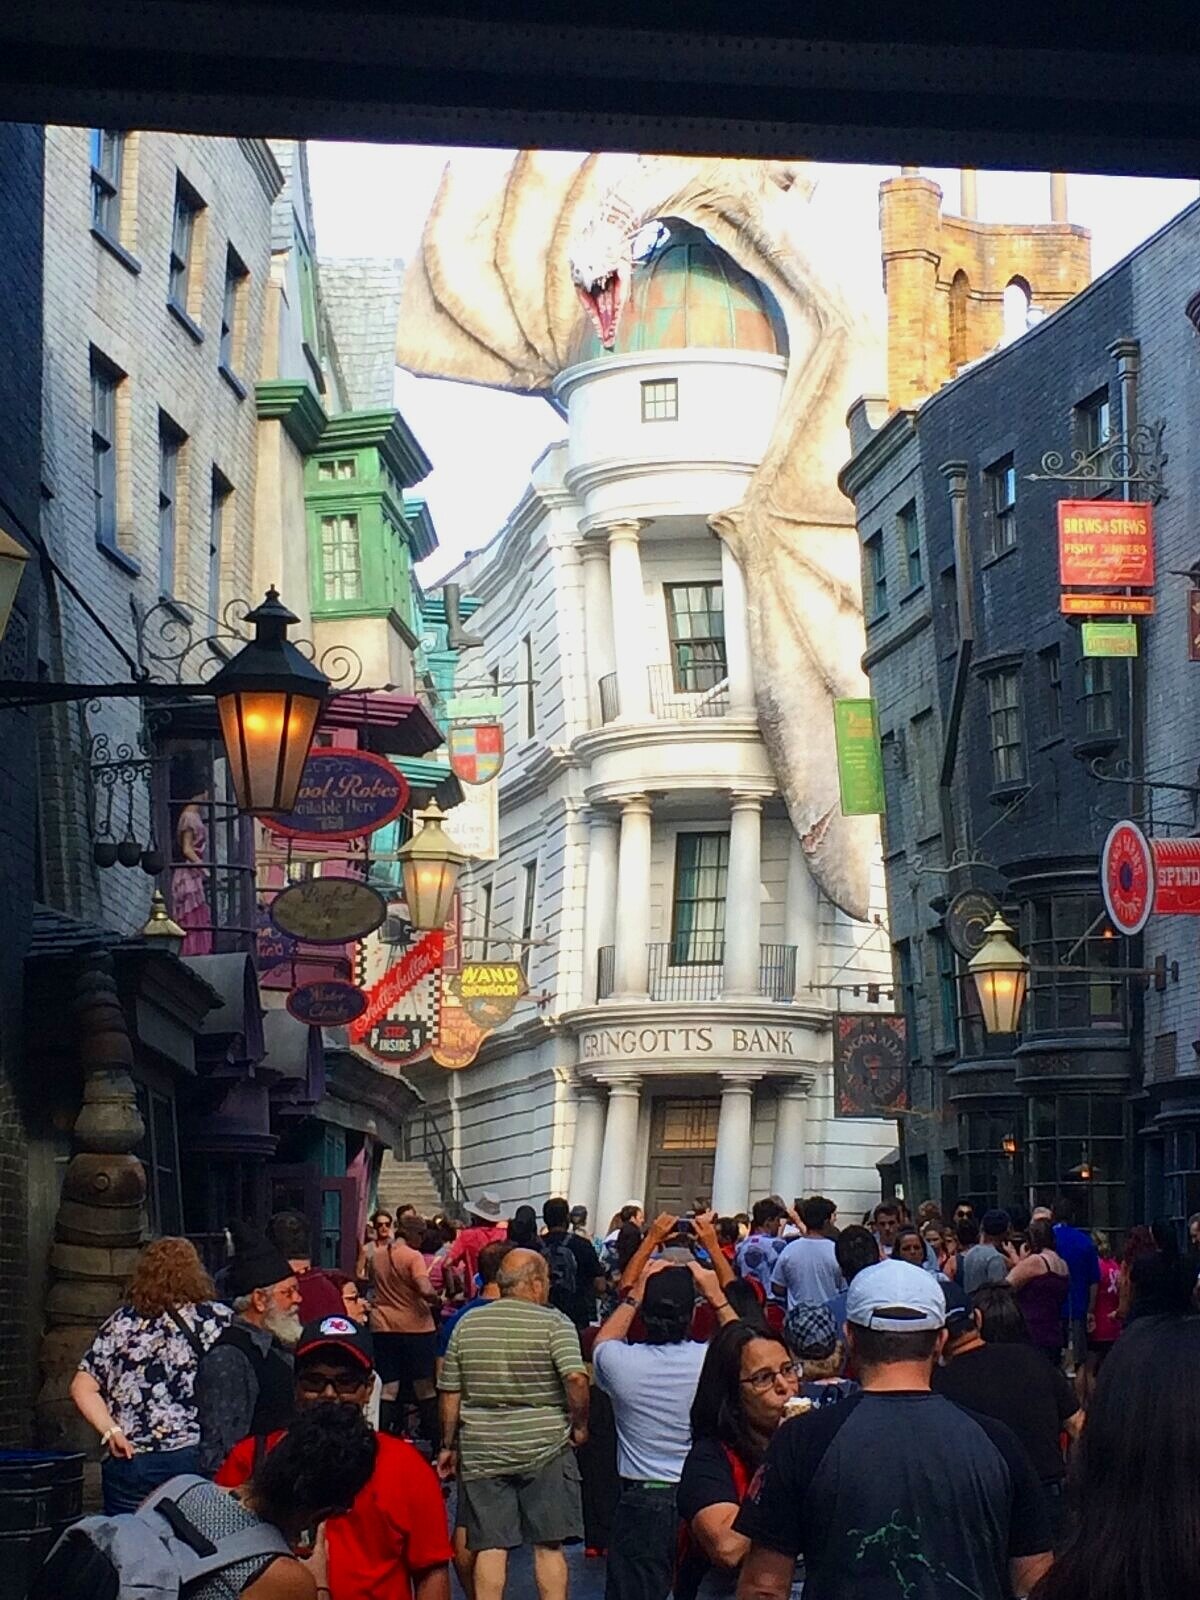 The Wizarding World of Harry Potter & Other Highlights of